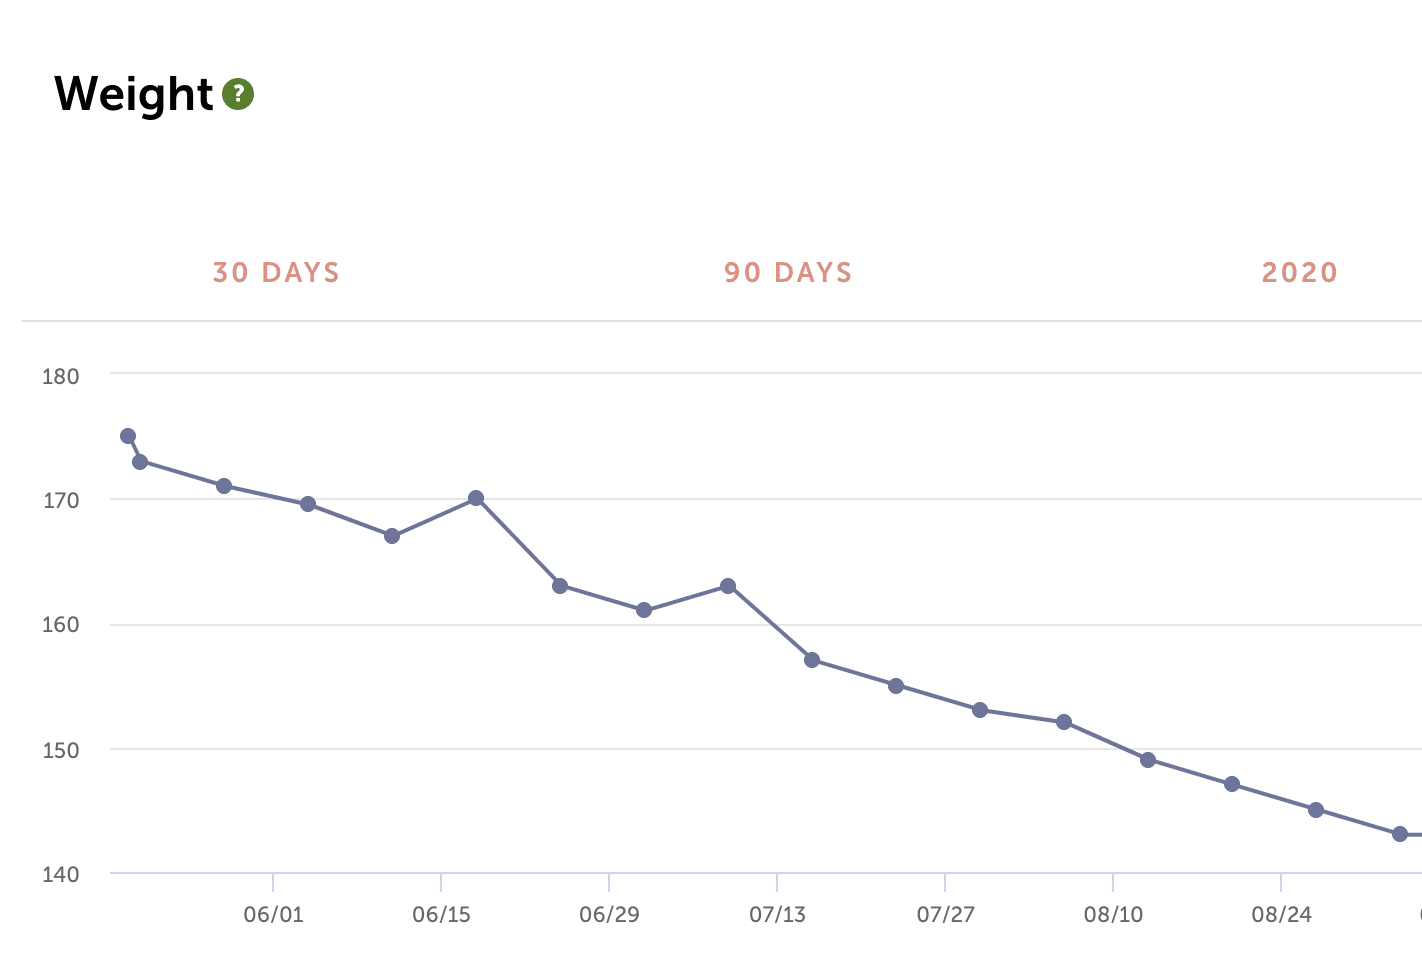 Graph of weight decreasing over 90 day period